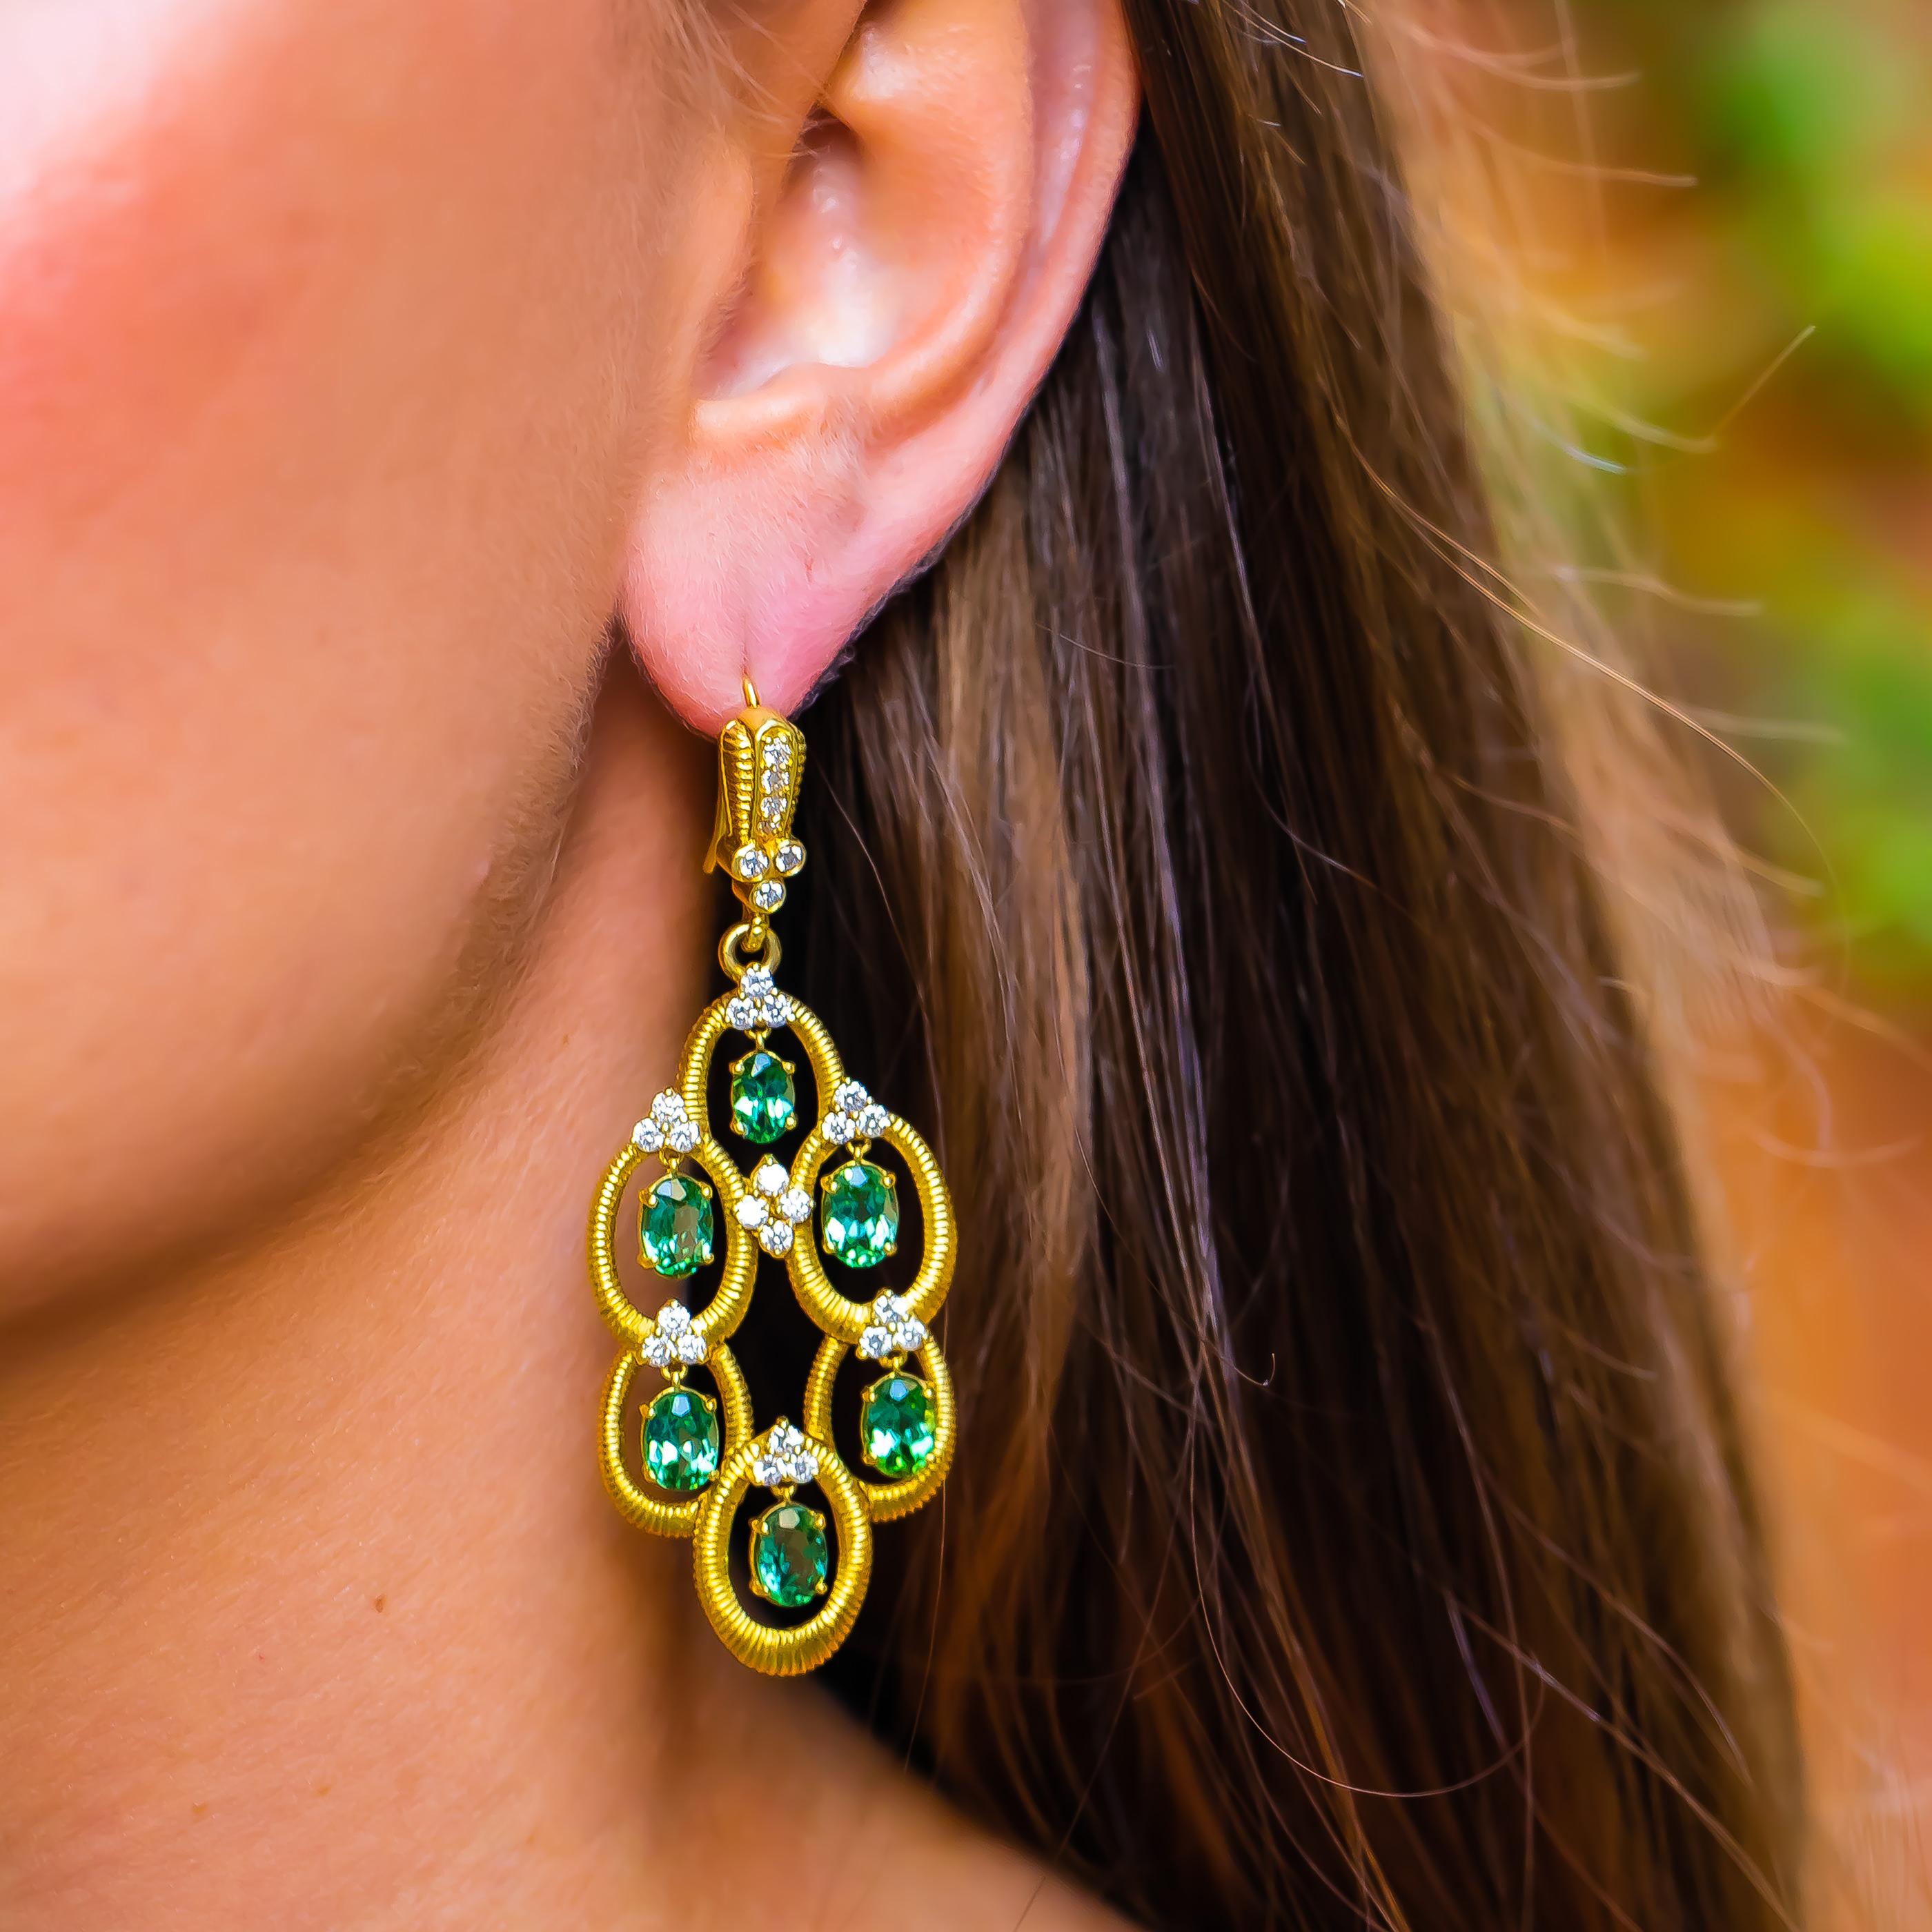 Beautiful 18K Yellow Gold Earrings with over 10 carats of Tourmalines. These earrings effortlessly round off any Elegant Evening Gown. 
Tourmaline = 10.5 carats
Diamonds = 1.8 carats
( Color: F, Clarity: VS )
18K Yellow Gold
Signed Judith